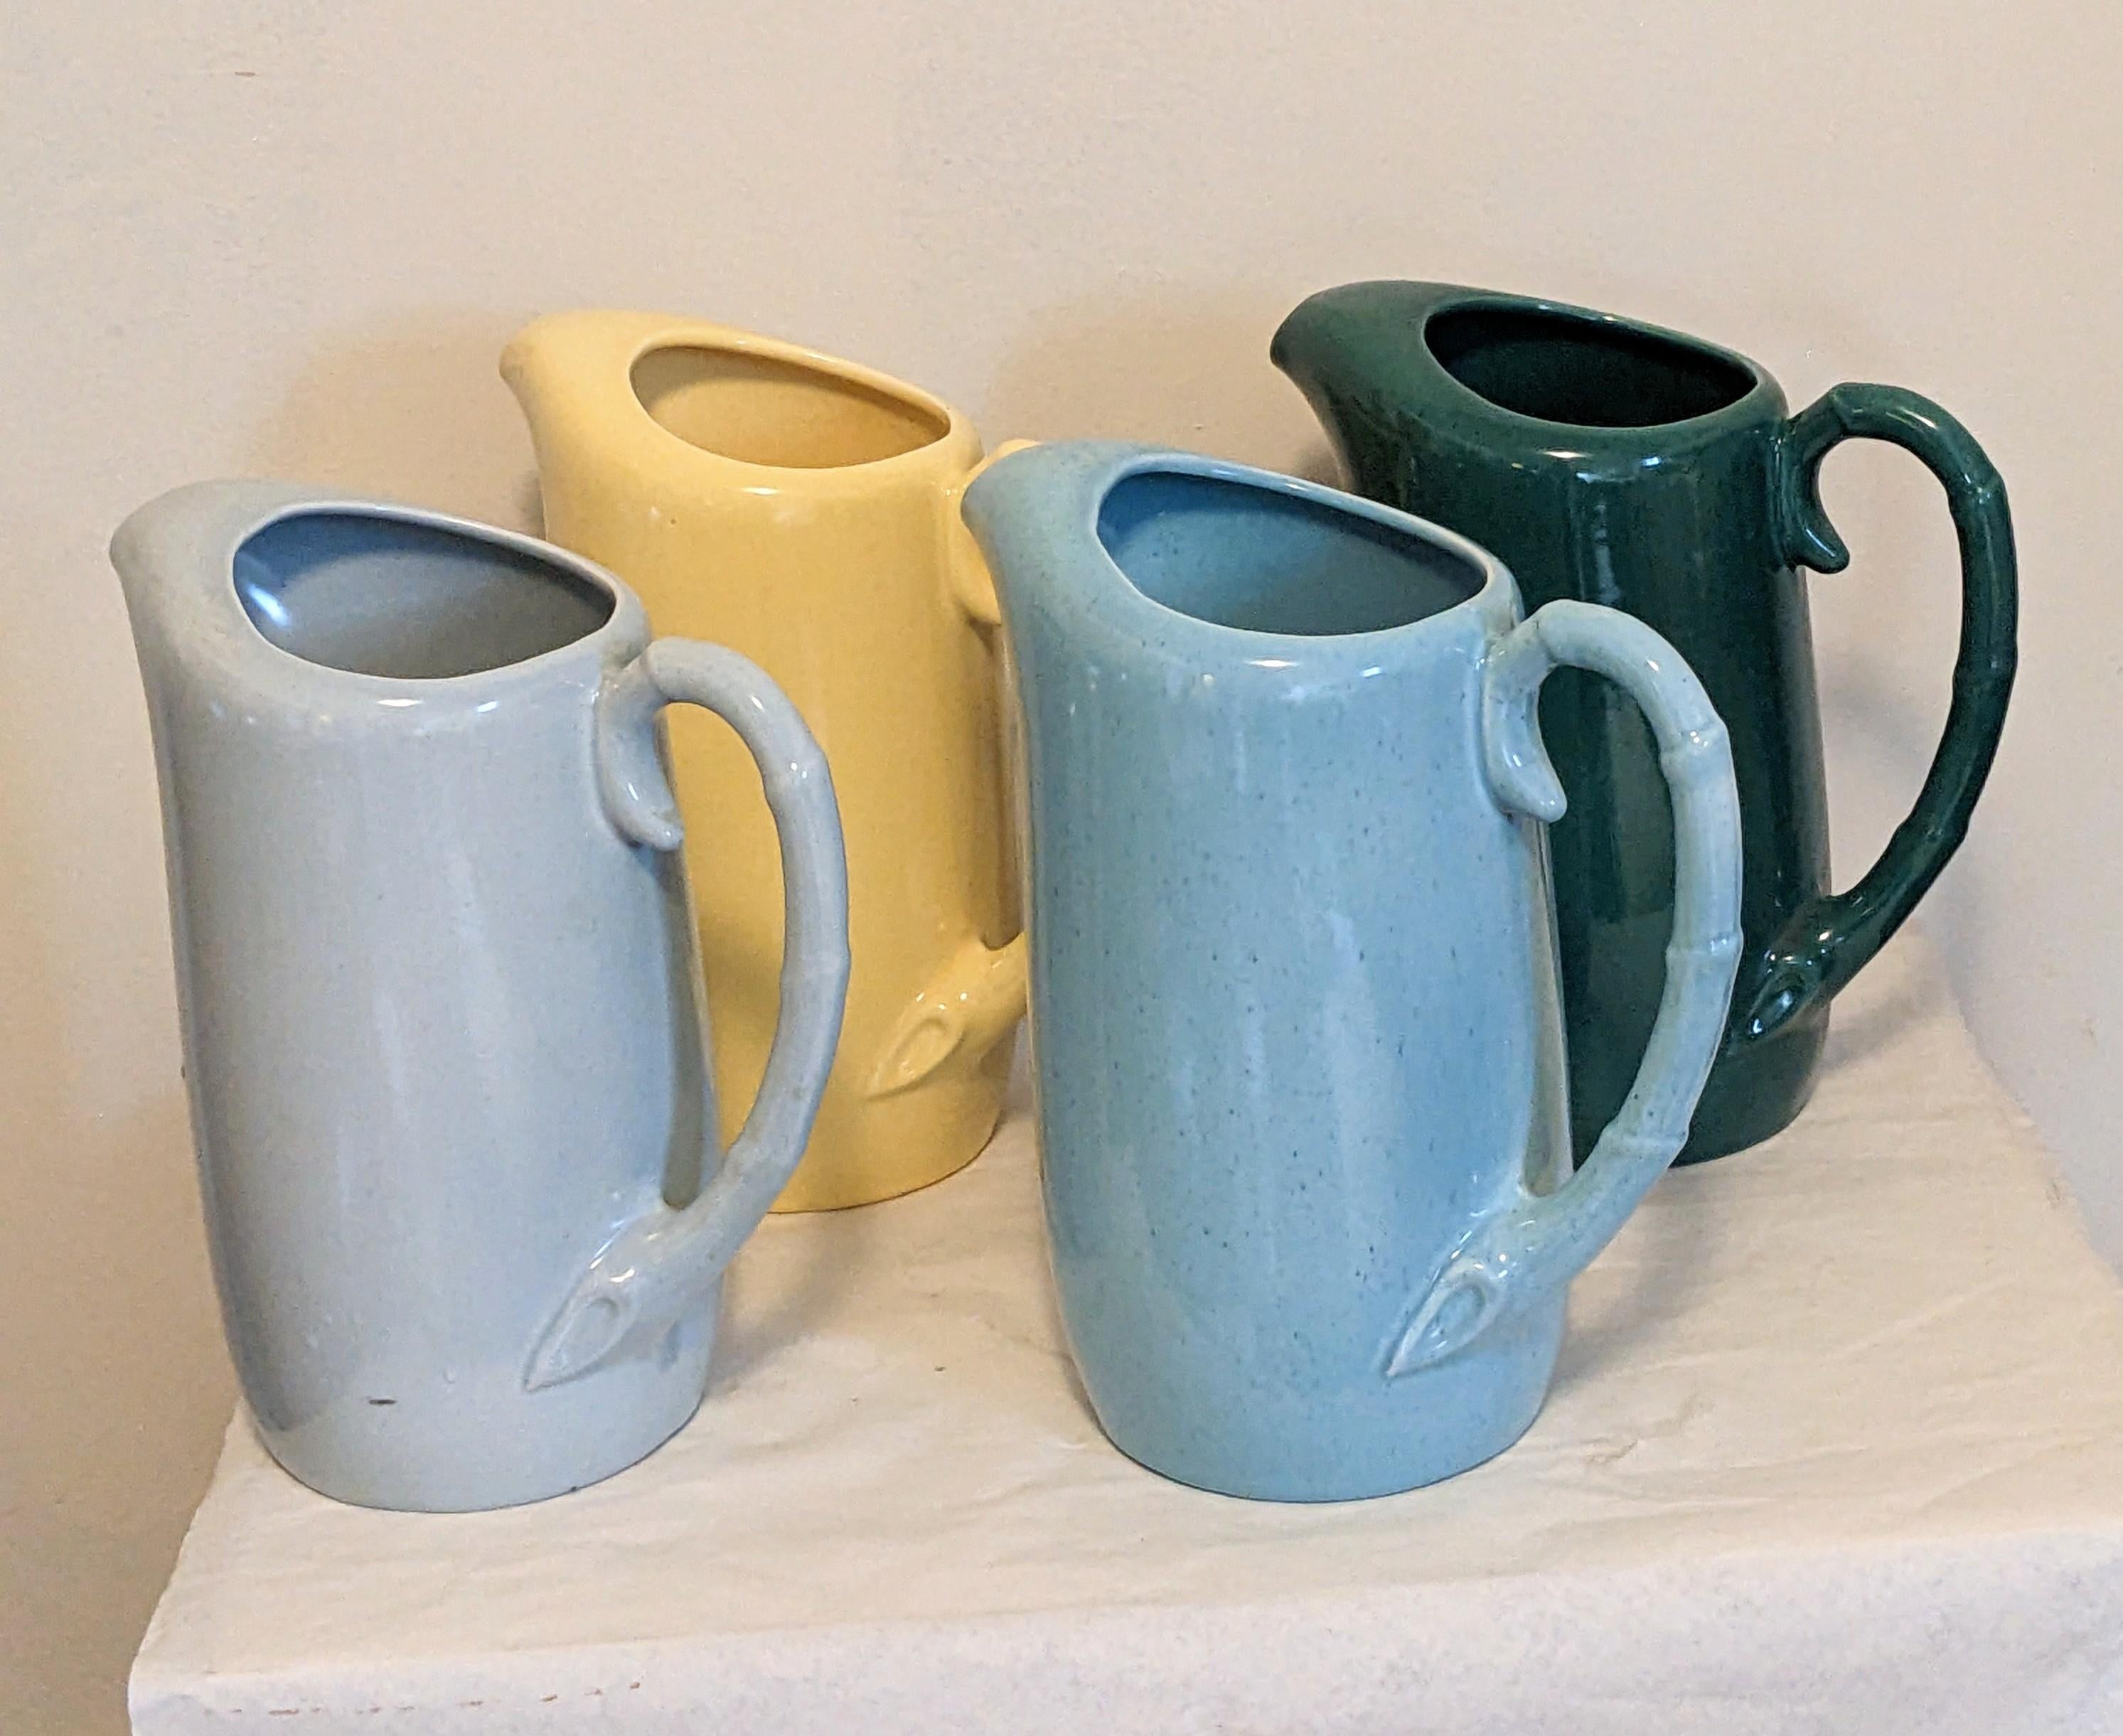 Set of 4 Art Deco Pottery pitchers attributed to Bauer Pottery, perfect for an instant splash of color in your decor. Great display pieces, each with a curved bamboo handle. 
Measures: Body 10